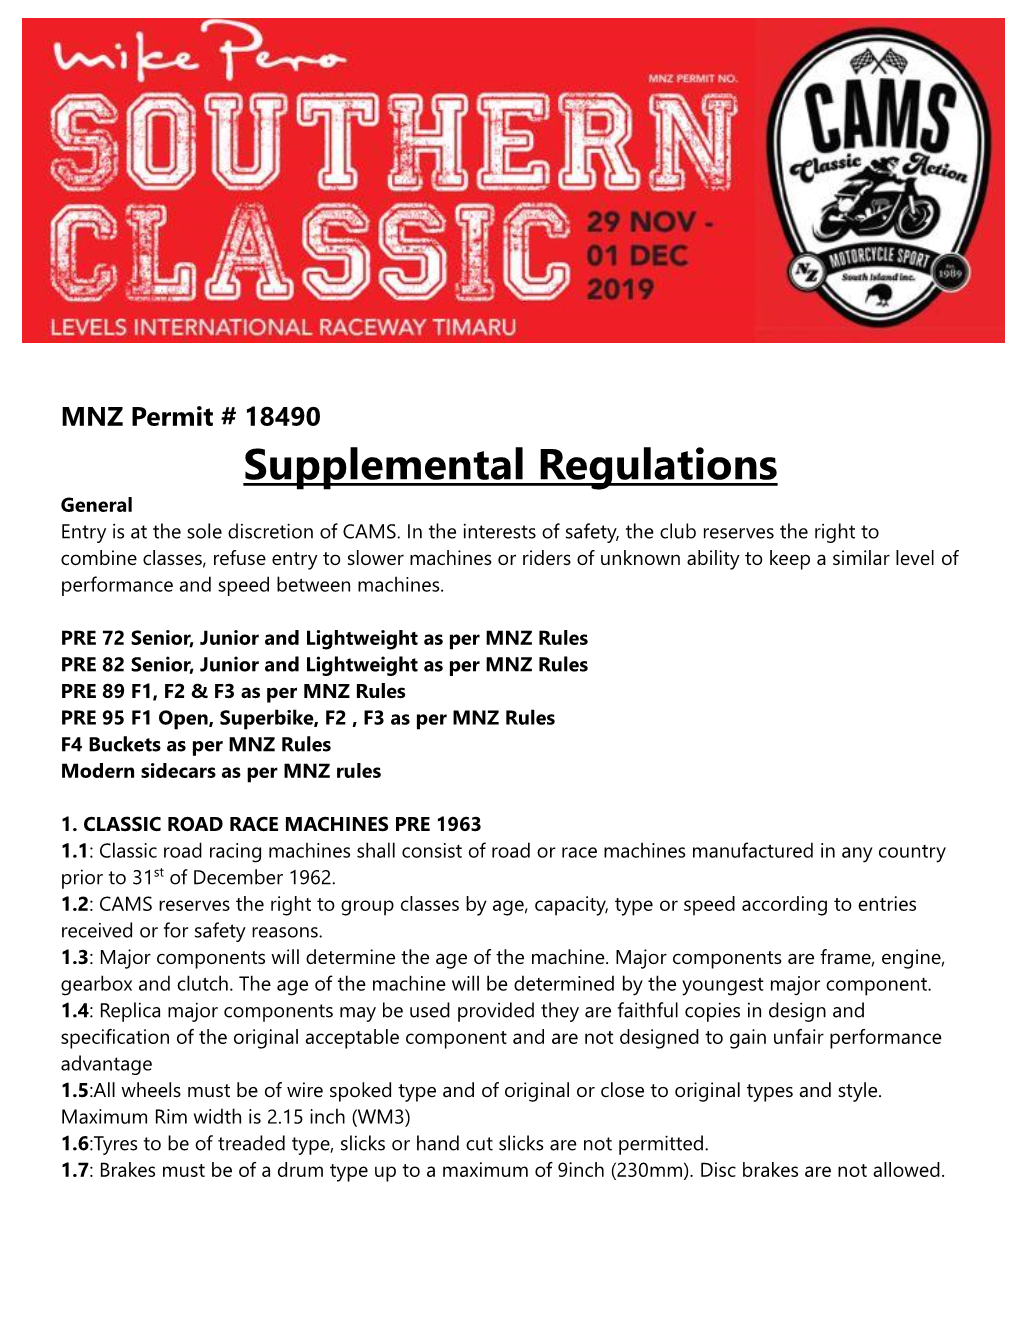 Supplemental Regulations General Entry Is at the Sole Discretion of CAMS